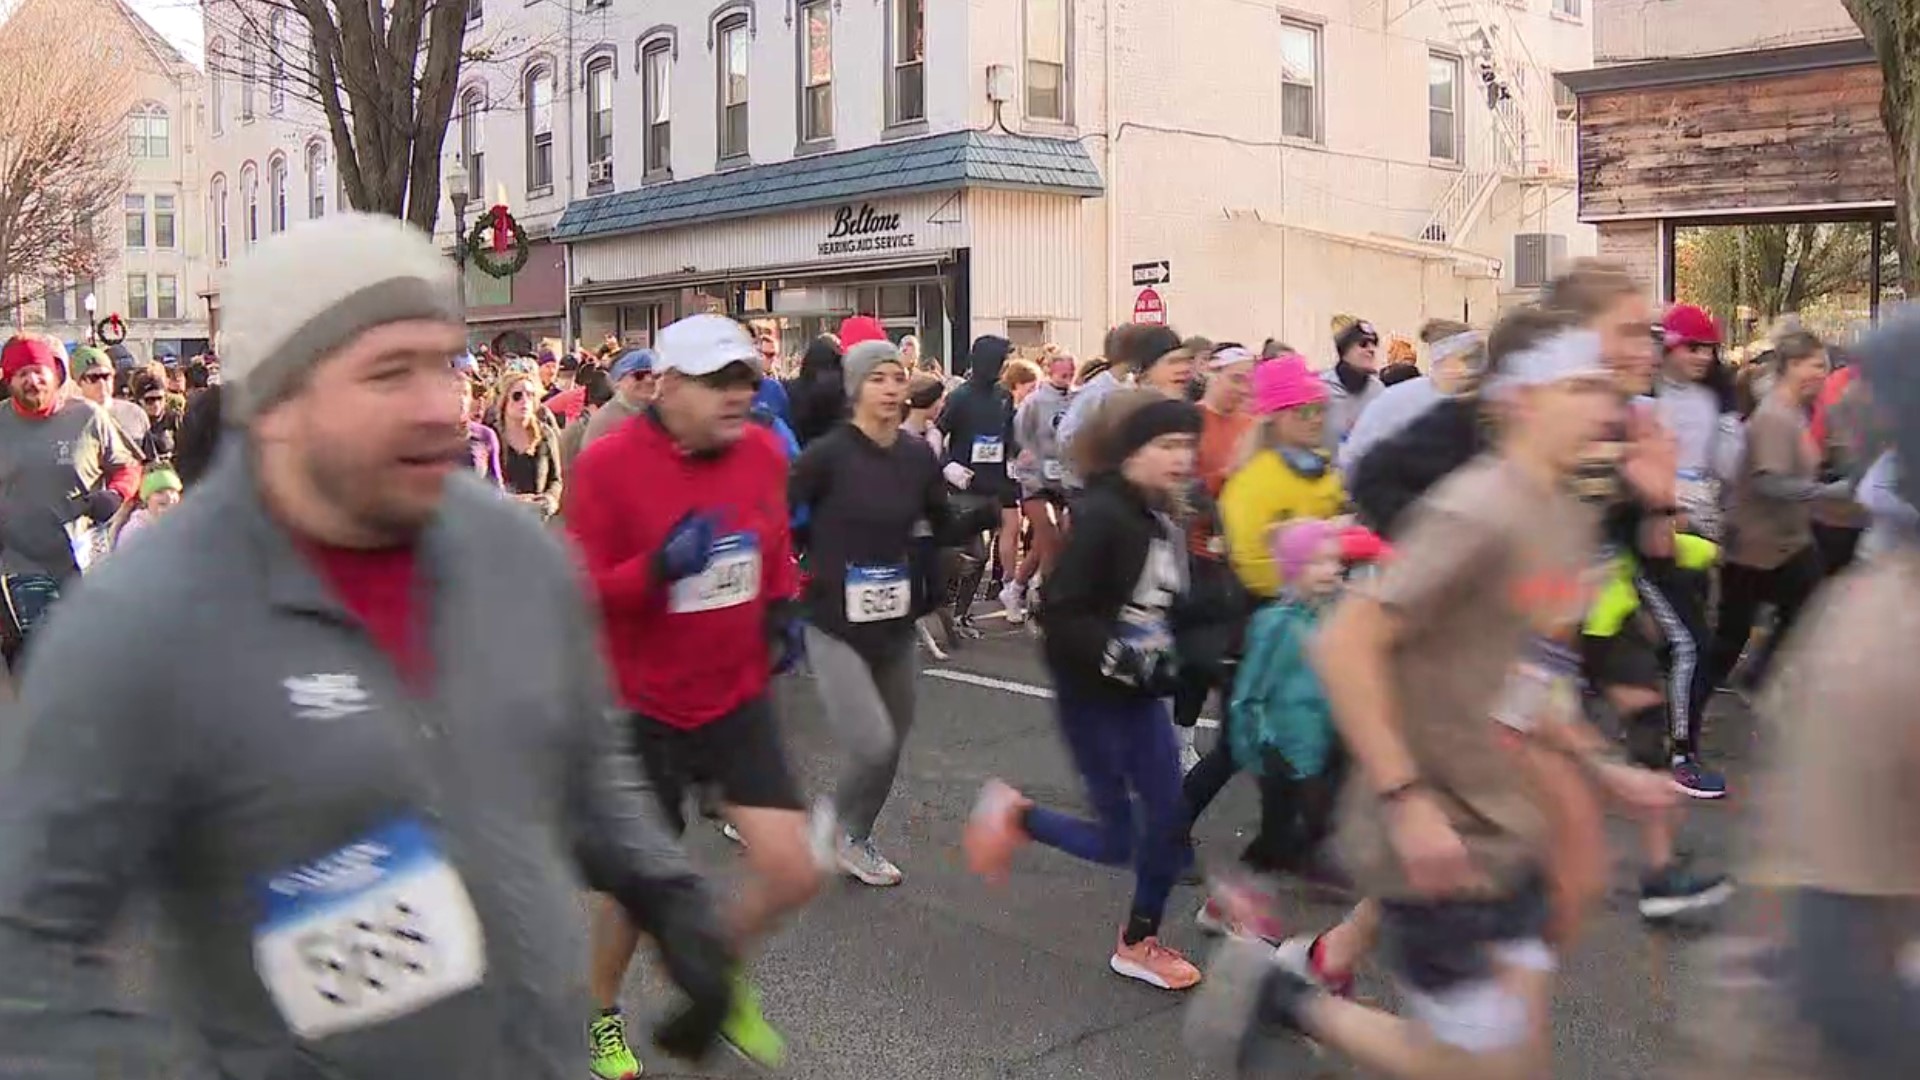 The sixth annual Pie Day 5K had a record number of runners.